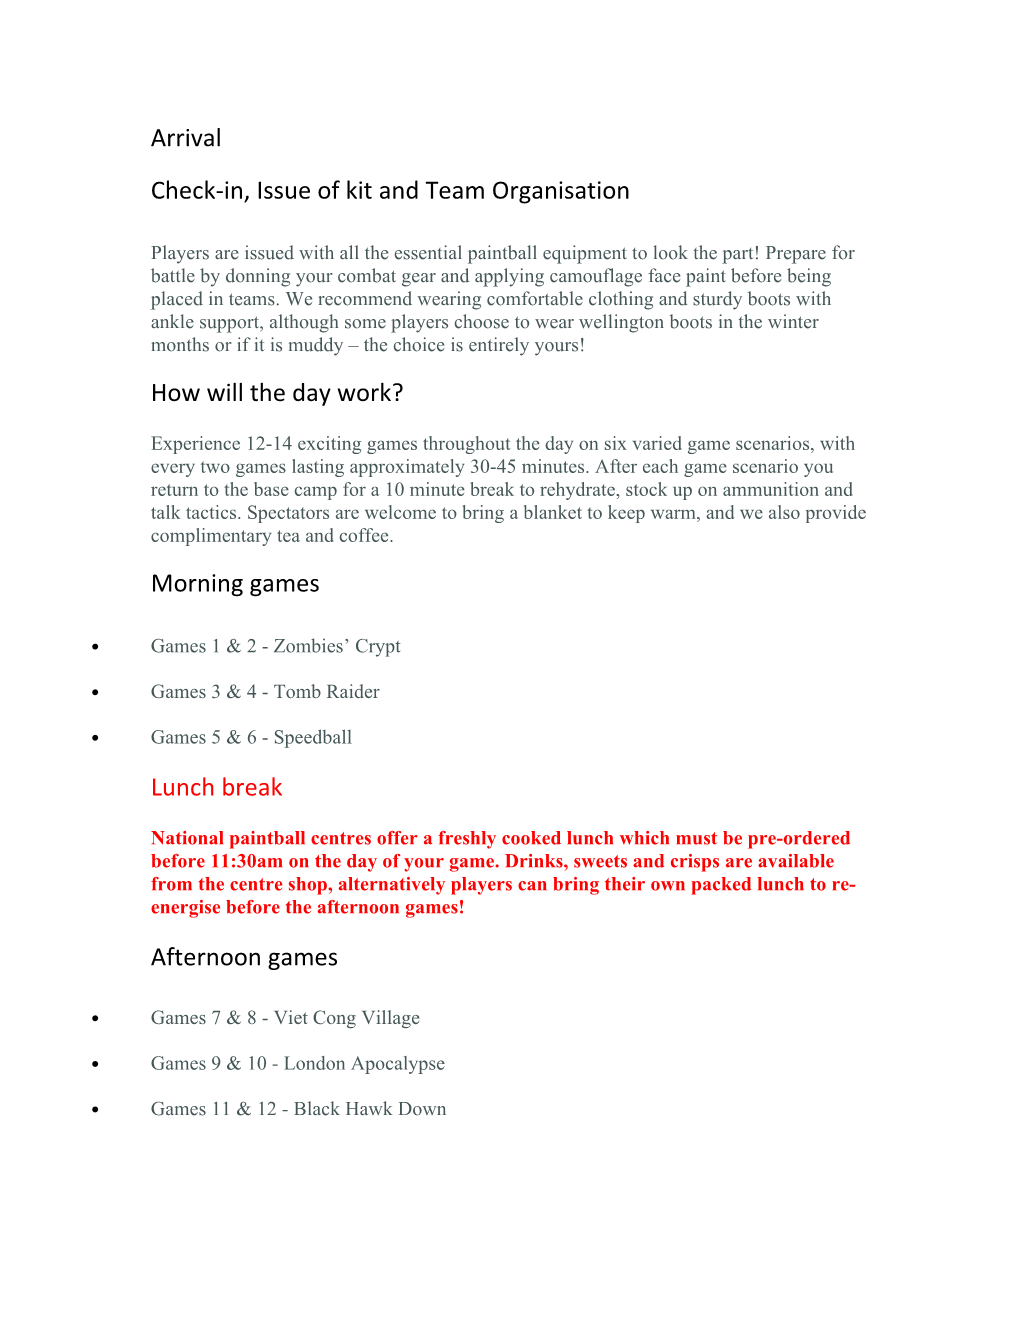 Check-In, Issue of Kit and Team Organisation